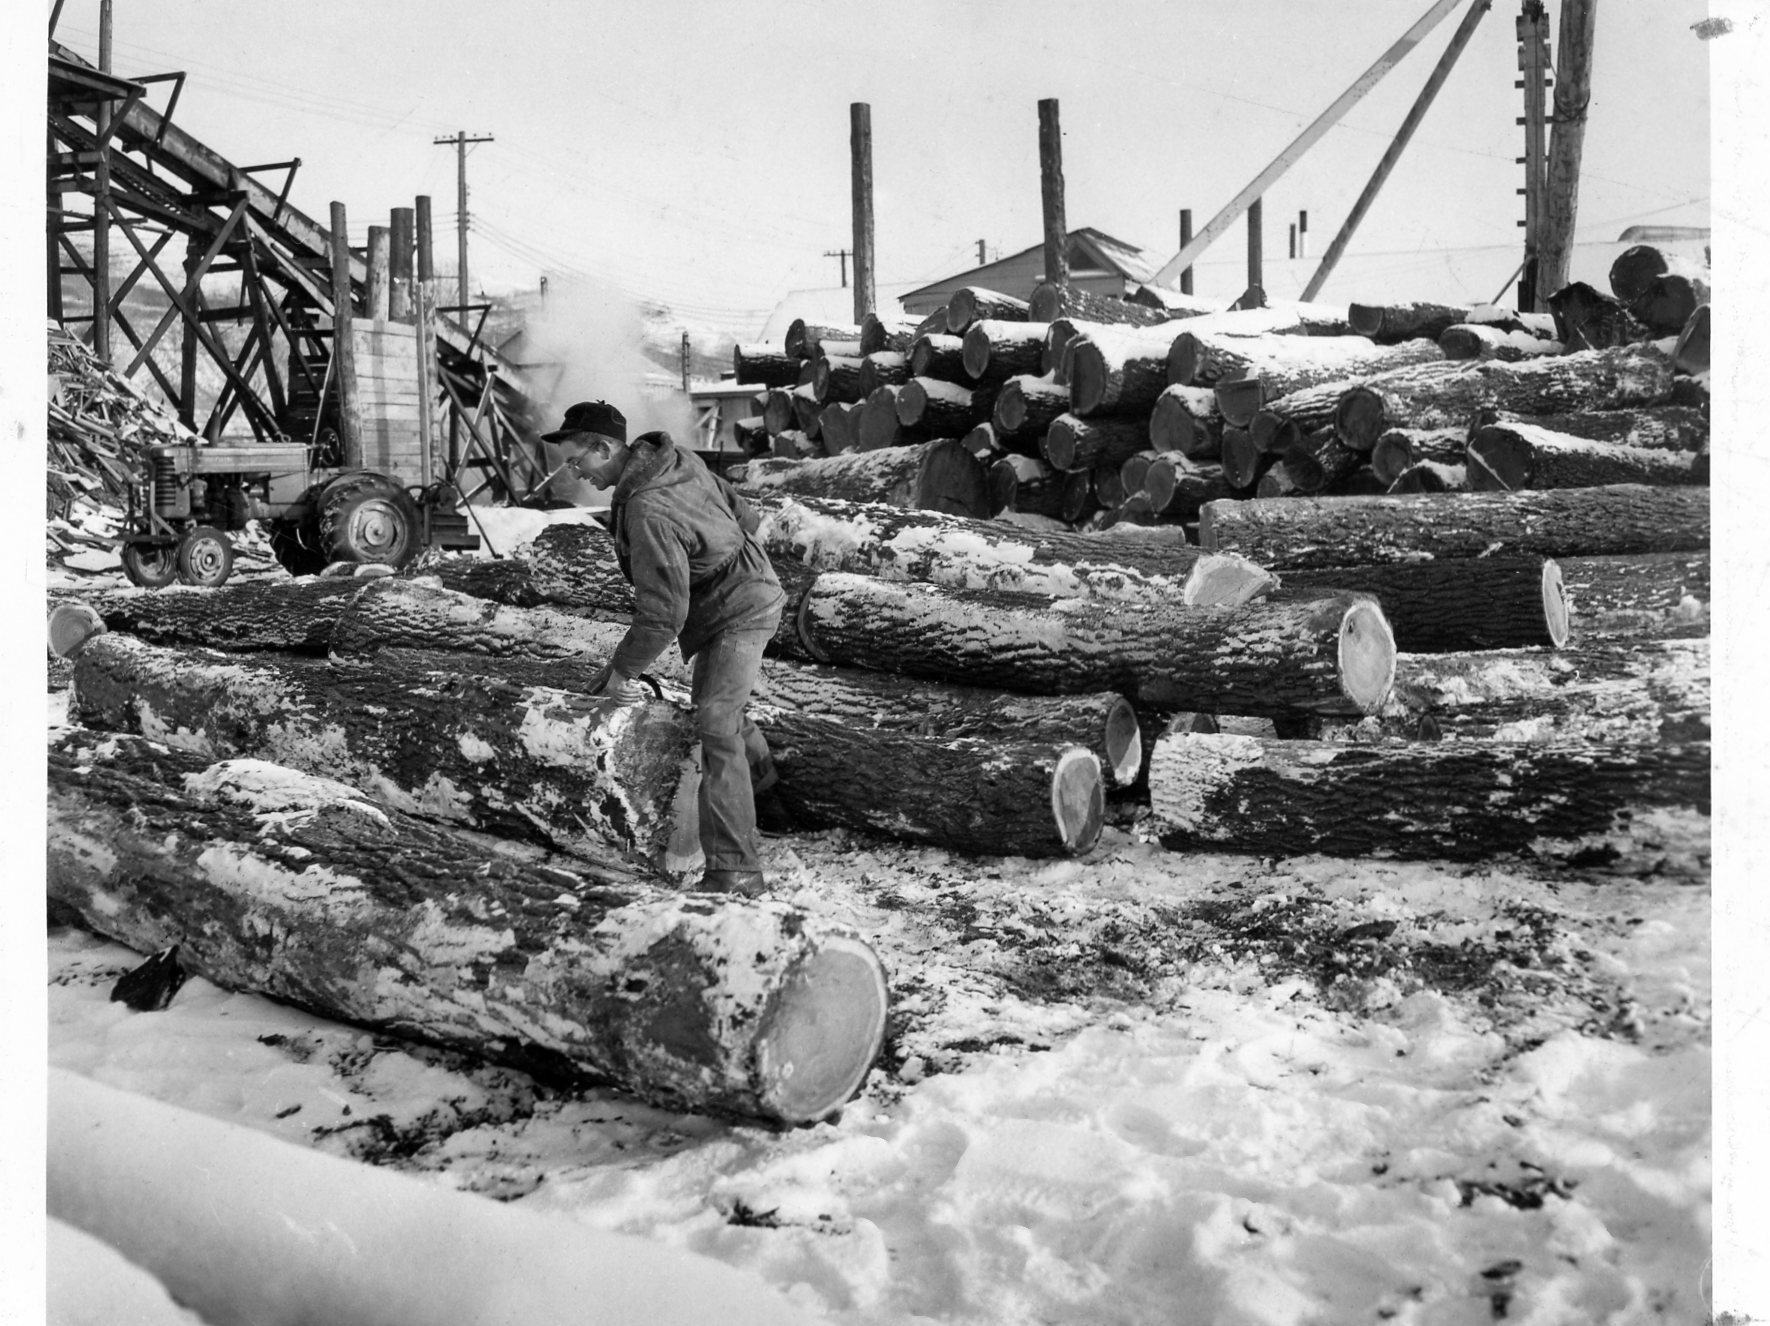 A photo of a worker measuring logs in the Midwest Walnut Company lumberyard